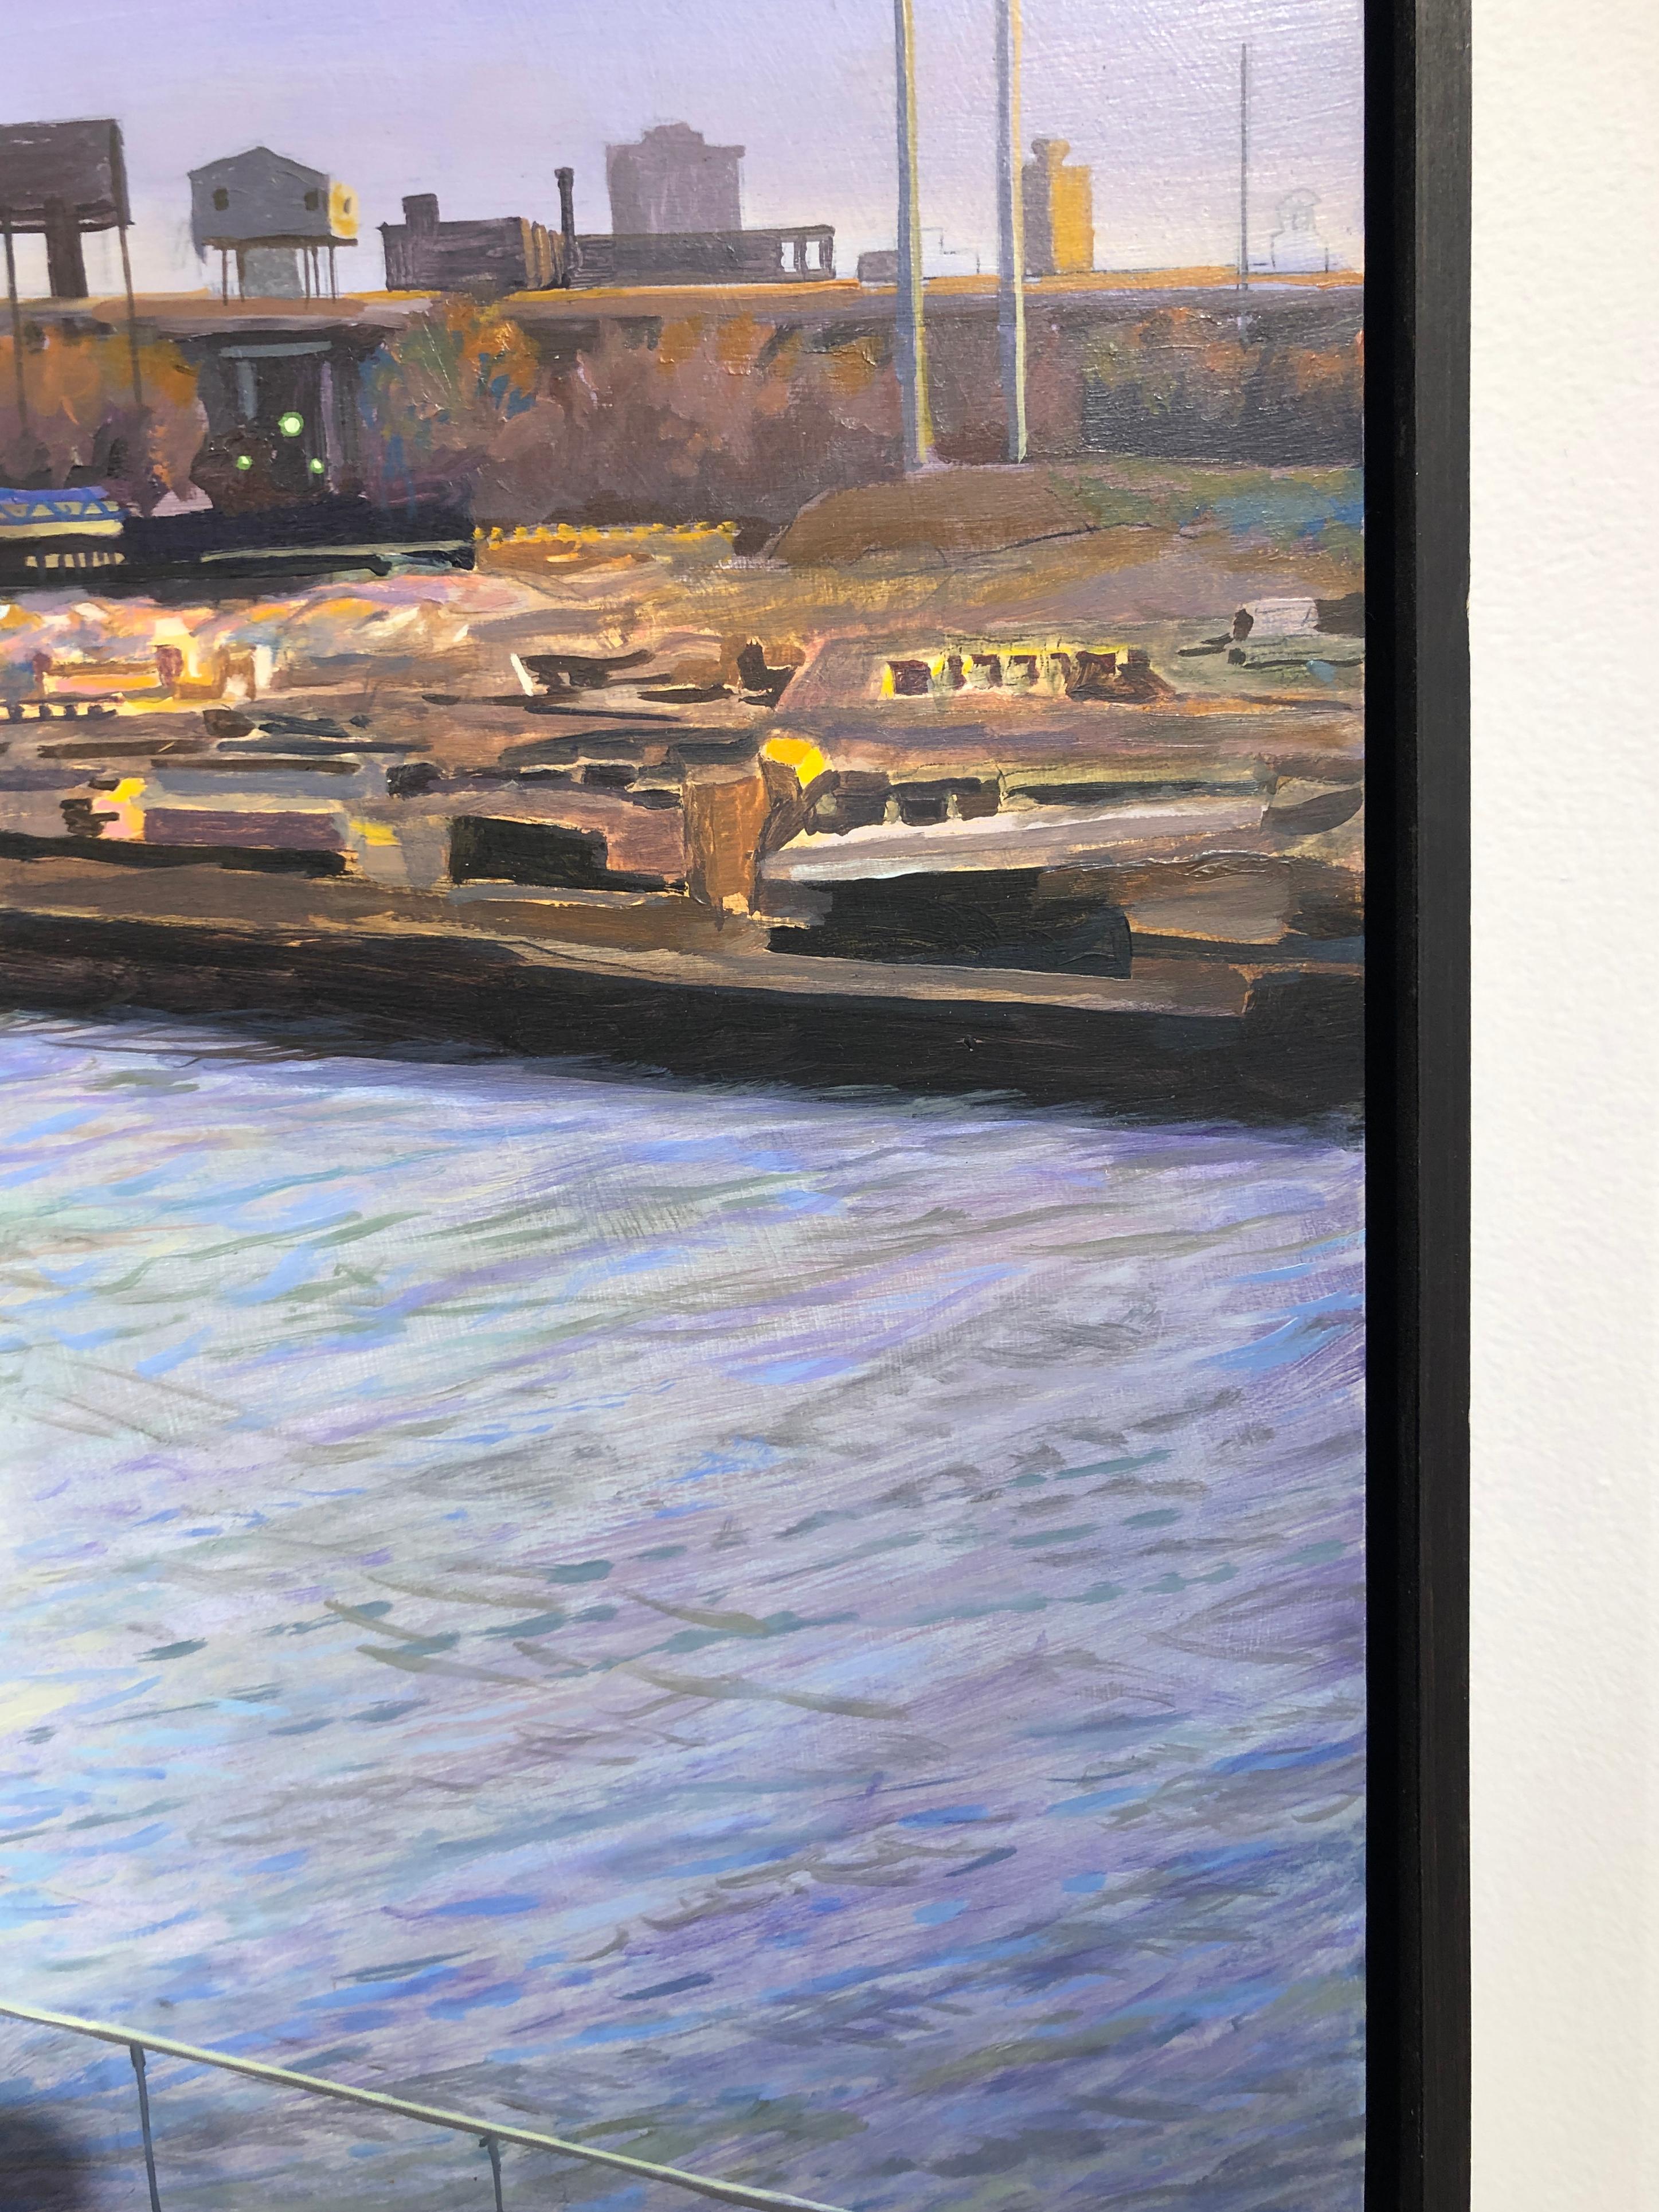 South Branch Chicago River - Original Oil Painting, River, Sky, Industrial Area - Gray Landscape Painting by Art Chartow